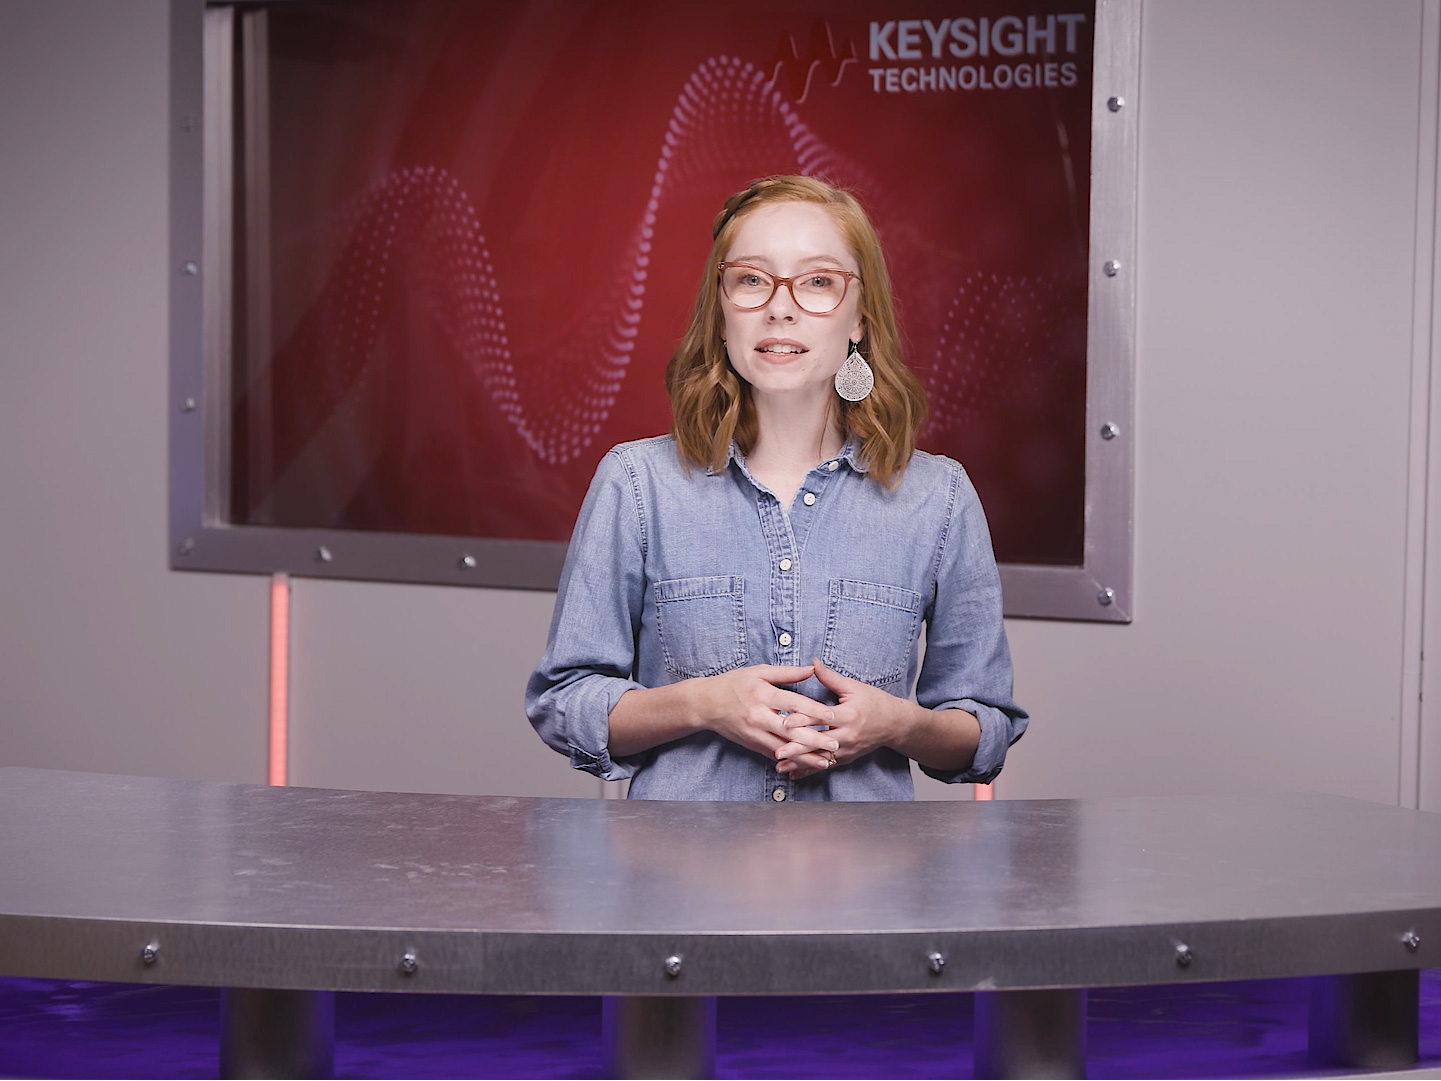 Young woman with brown hair, standing in front of a large screen displaying “Keysight Technologies” in the top right. decoding=